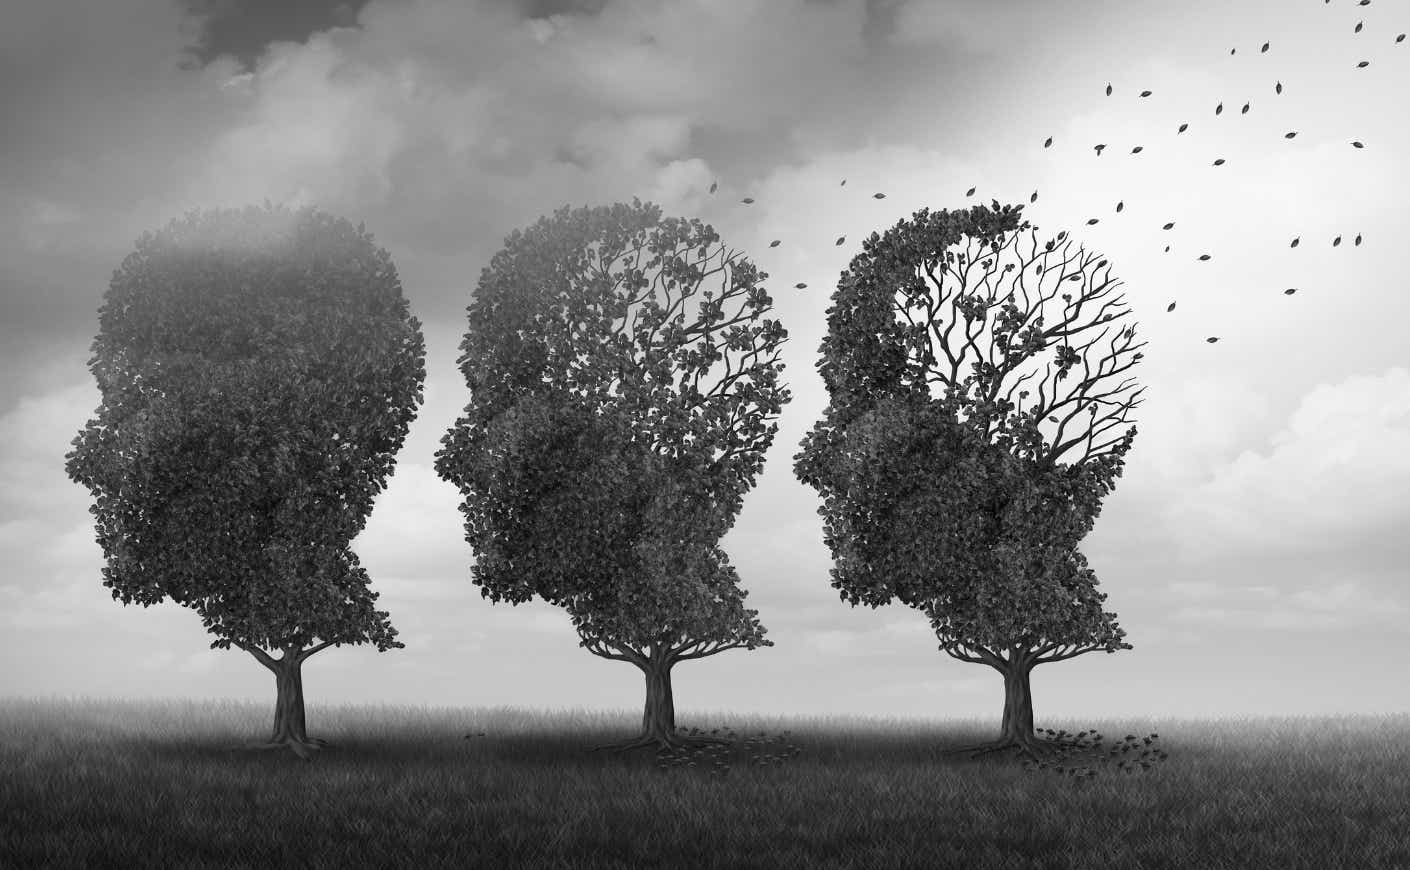 Trees in the shape of heads, with leaves falling off to represent dementia